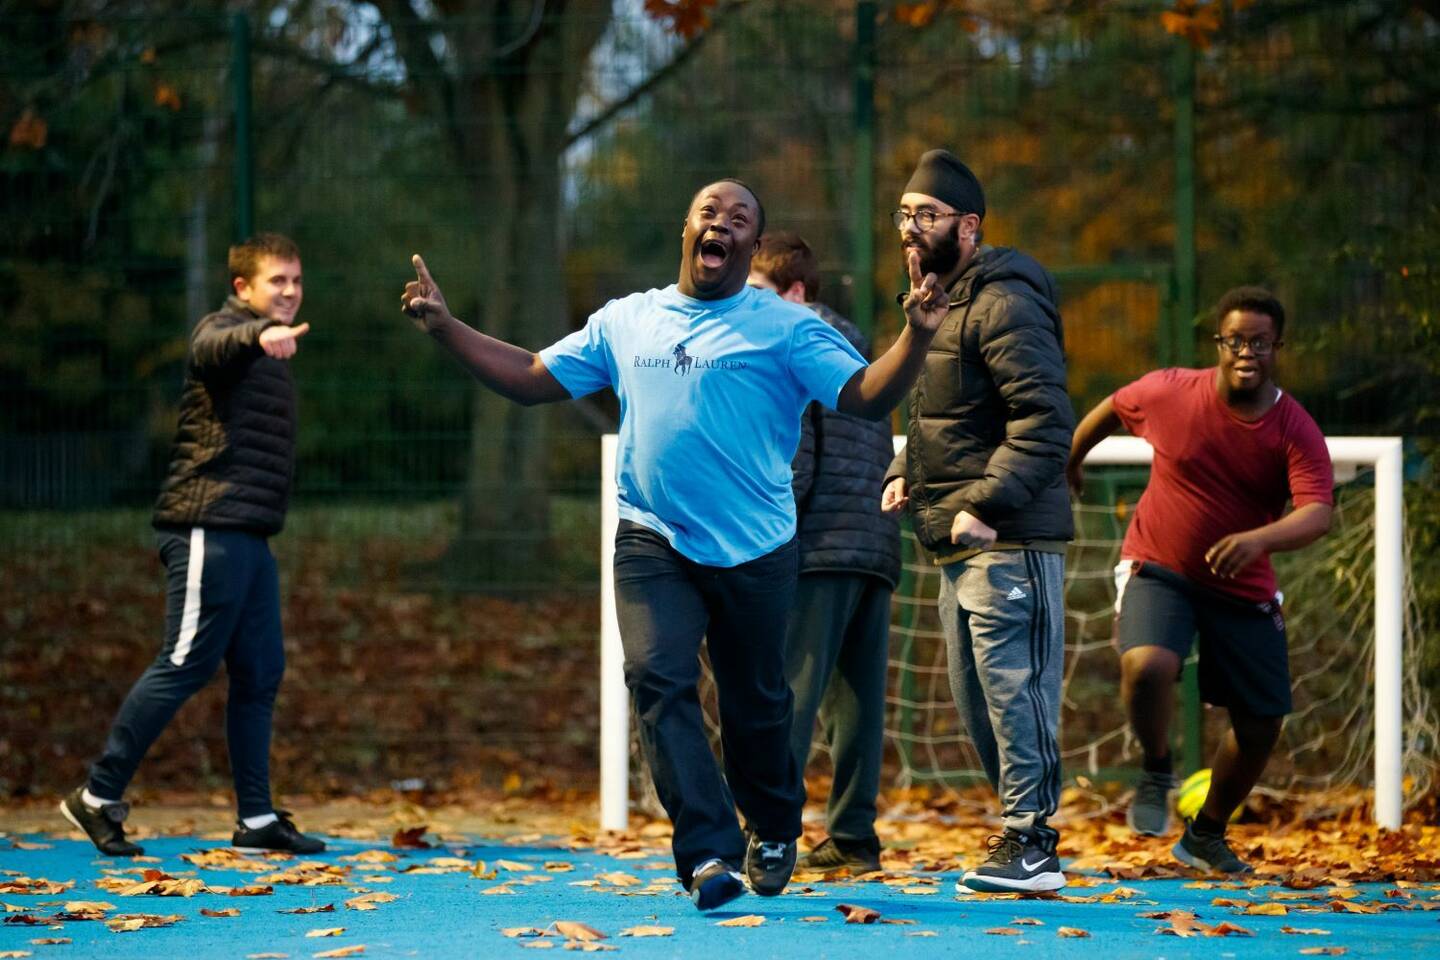 A group of disabled people enjoying themselves being active outside. 